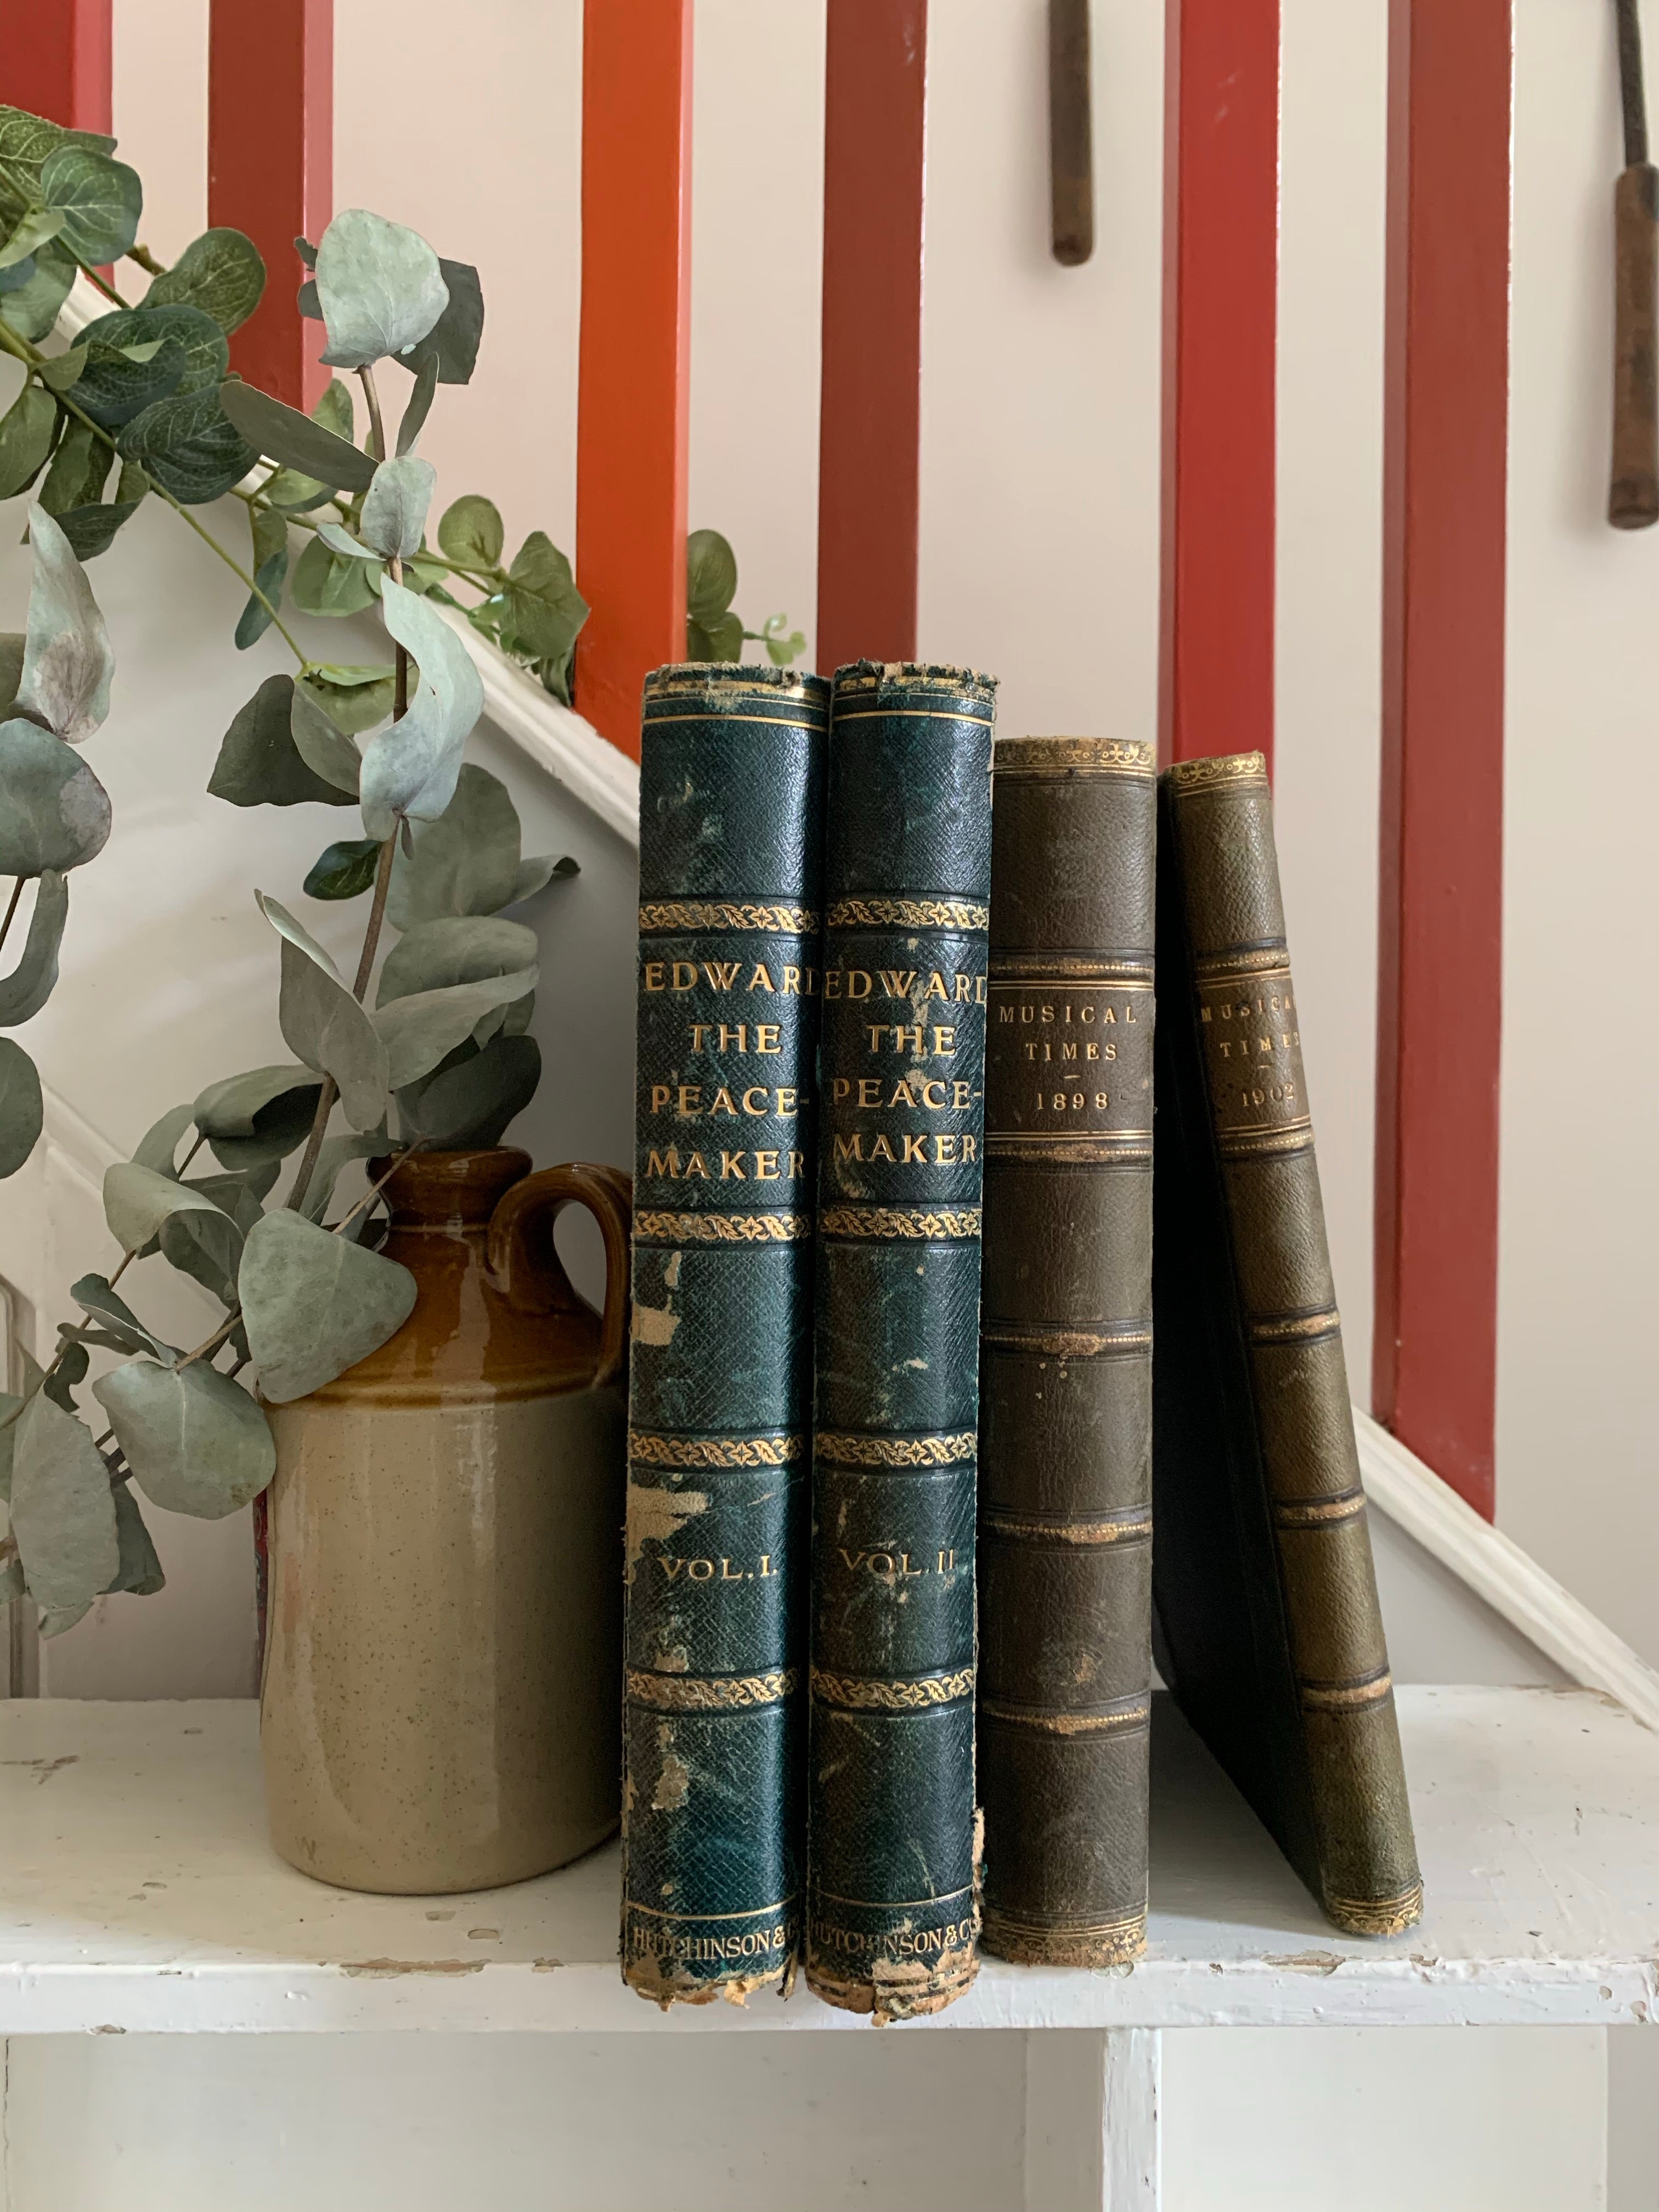 Green Book Bundle with Leather Spines